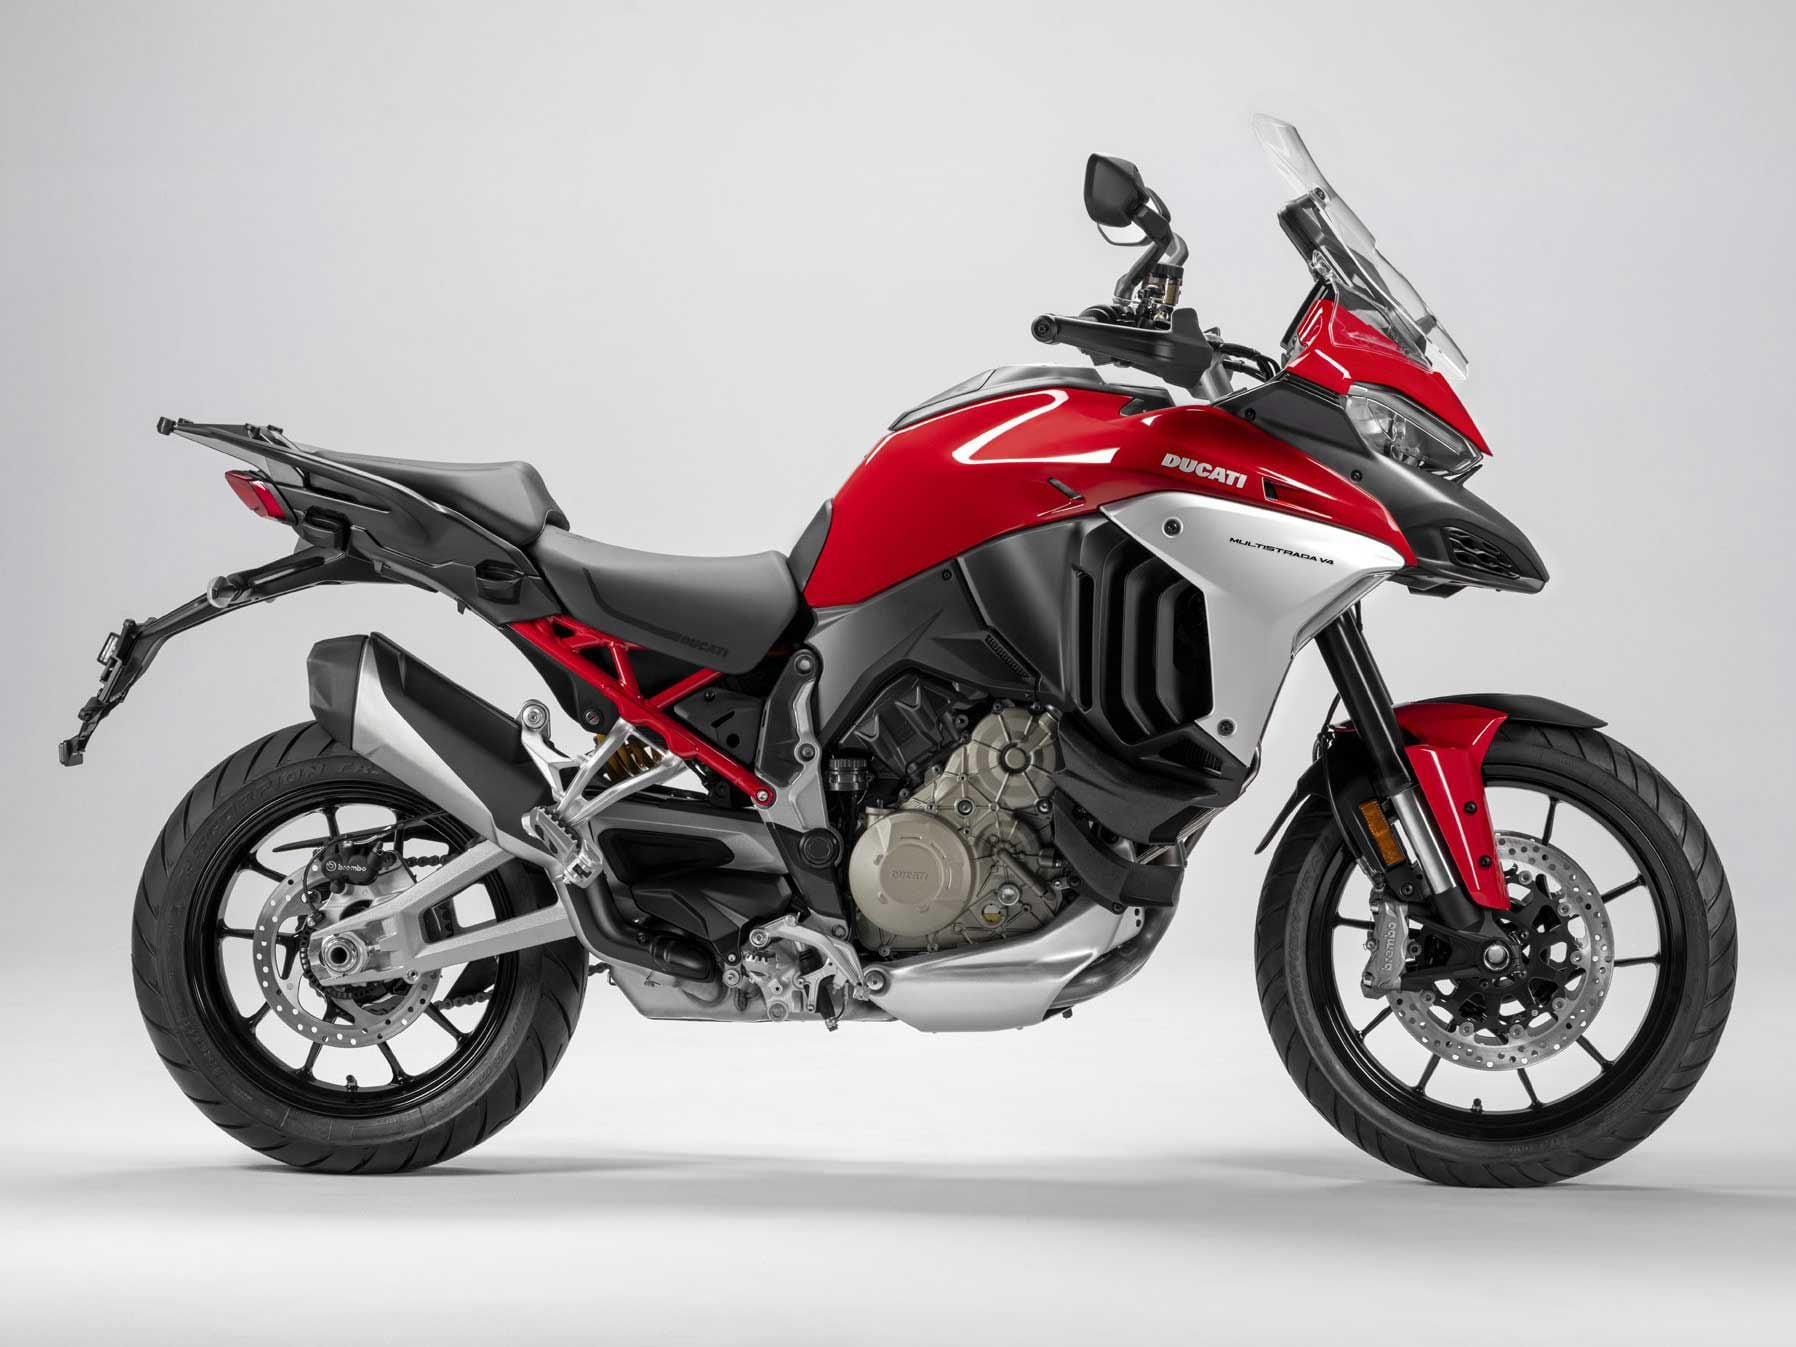 The Ducati Multistrada V4 was the top-selling motorcycle in 2021.